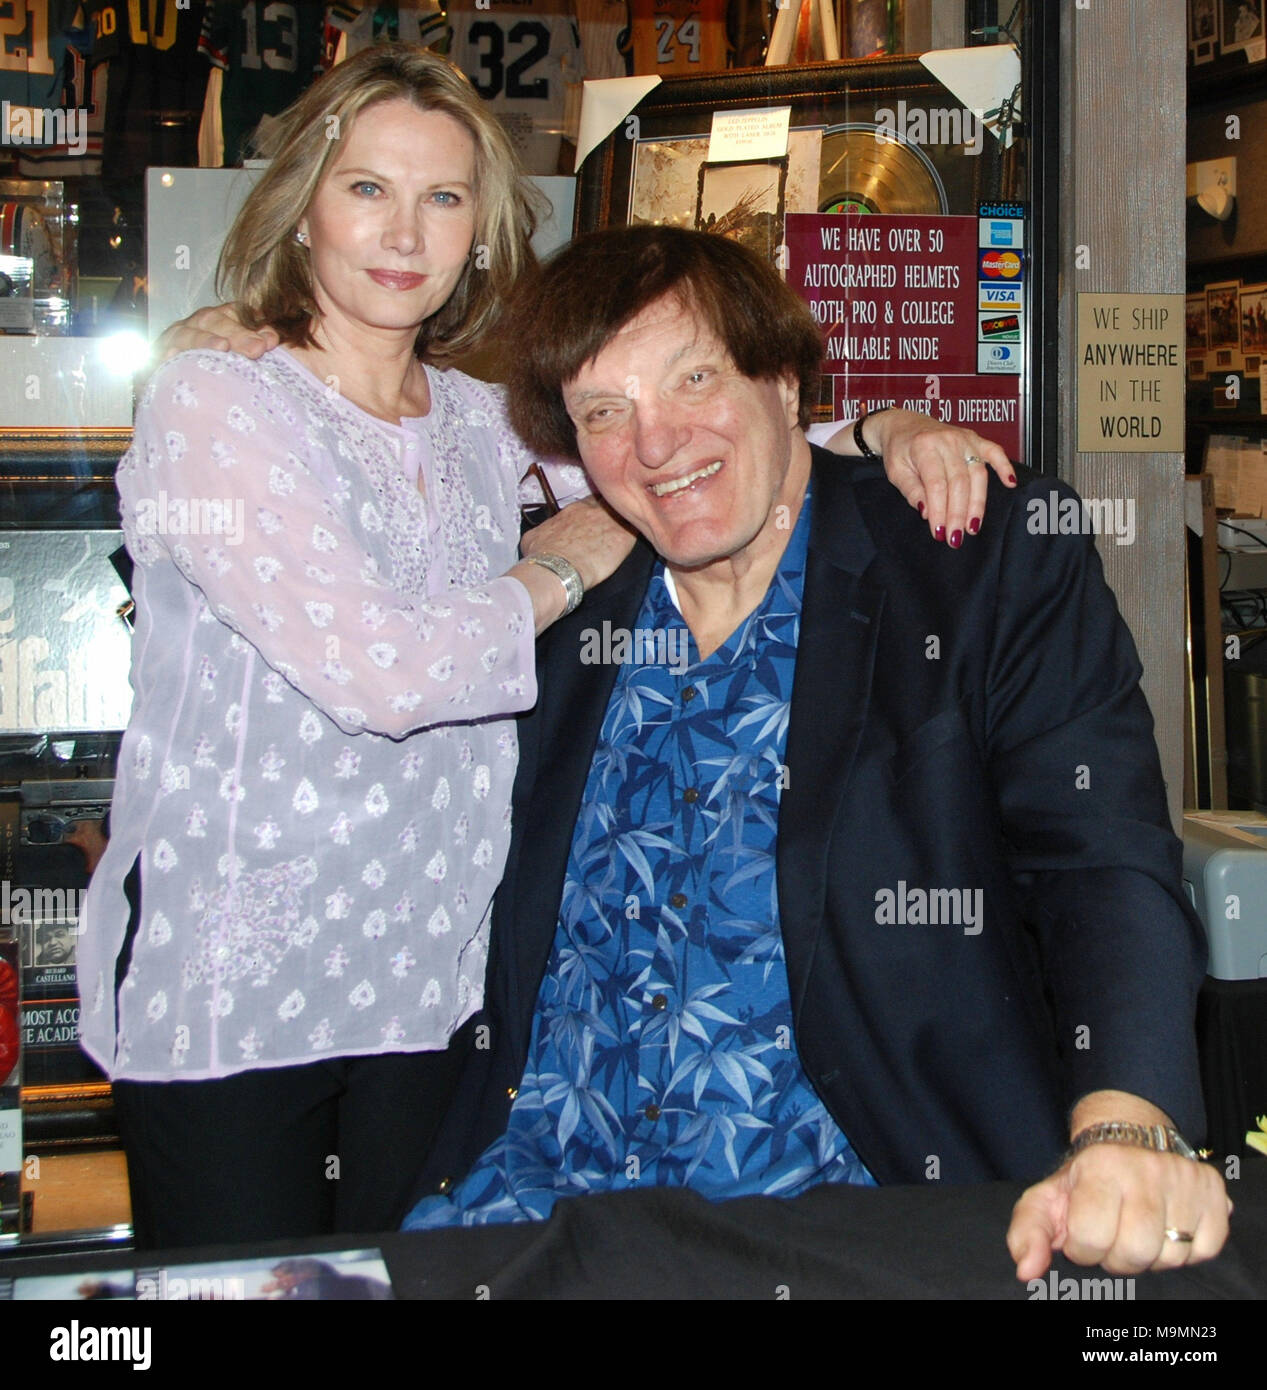 LAS VEGAS - NOVEMBER 30: Richard ' Jawz'  Kiel (The Spy Who Loved Me, Moonraker) and Maud Adams (The Man with The Golden Gun, Octopussy)  at the Gallery of Legends memorabilia store in the mall adjoining the Planet Hollywood Hotel & Casino.  on November 29, 2008 in Las Vegas, Nevada.    People:  Richard Kiel, Maud Adams Stock Photo